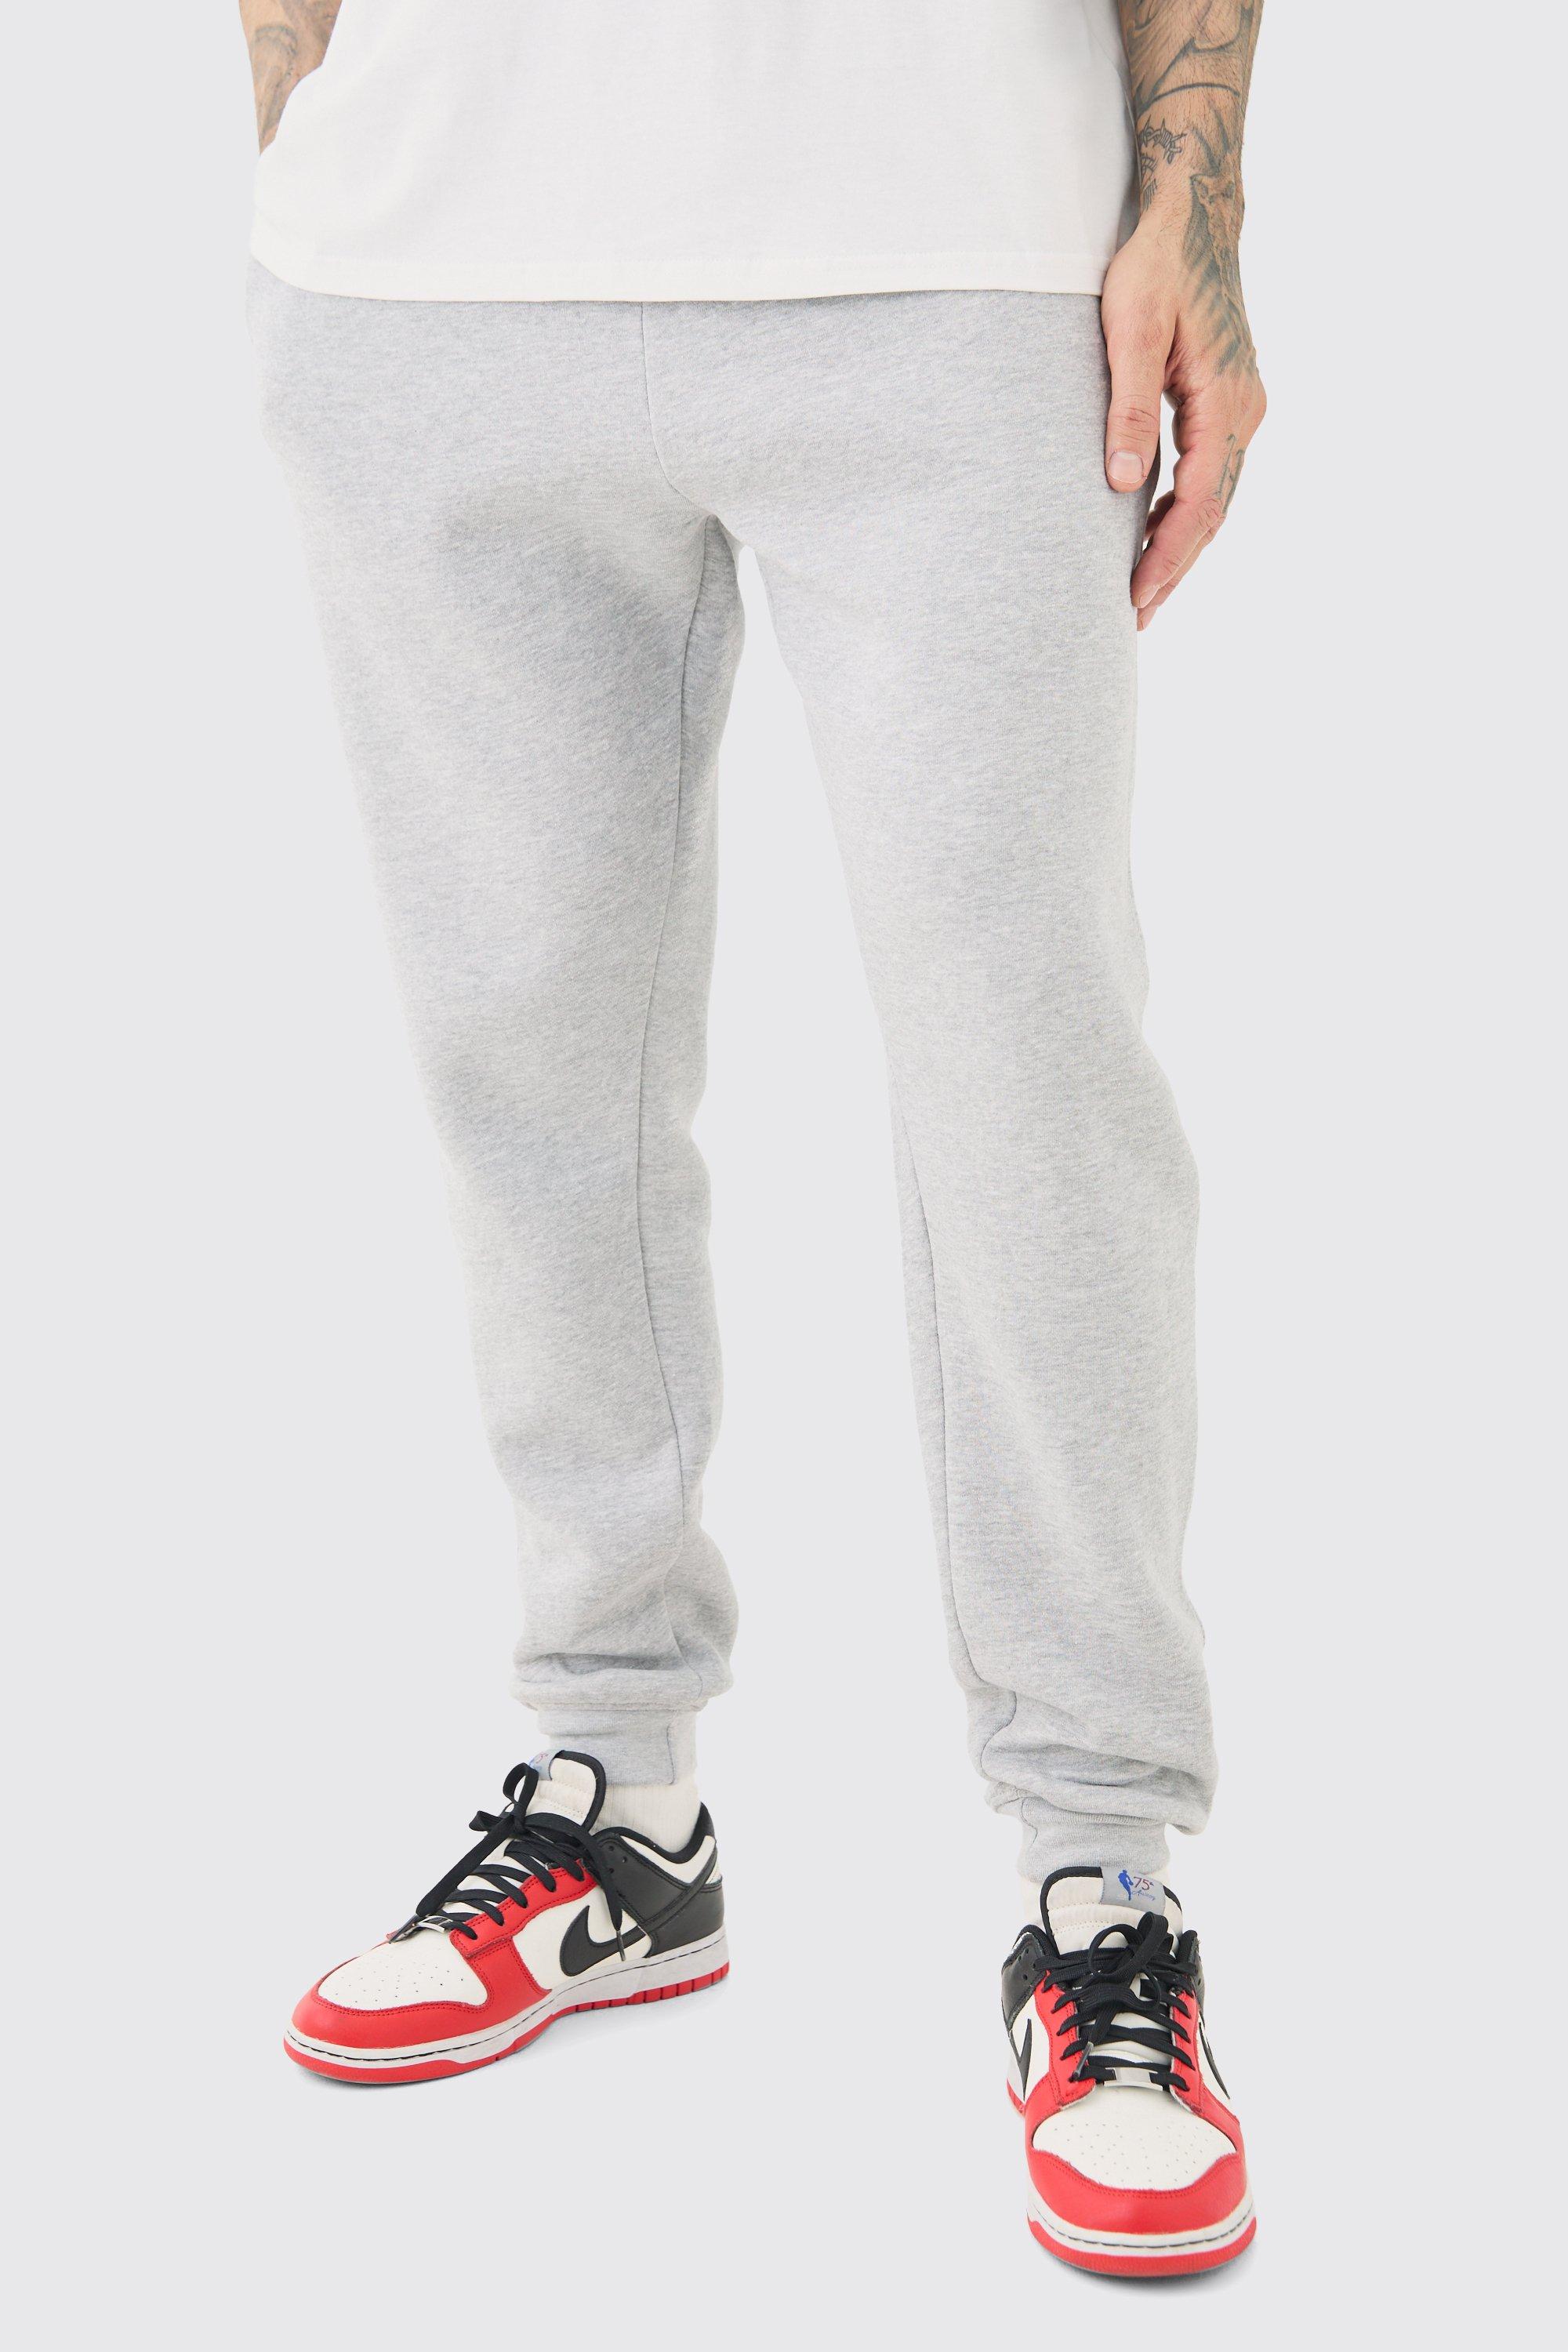 Image of Tall Basic Skinny Fit Jogger In Grey Marl, Grigio